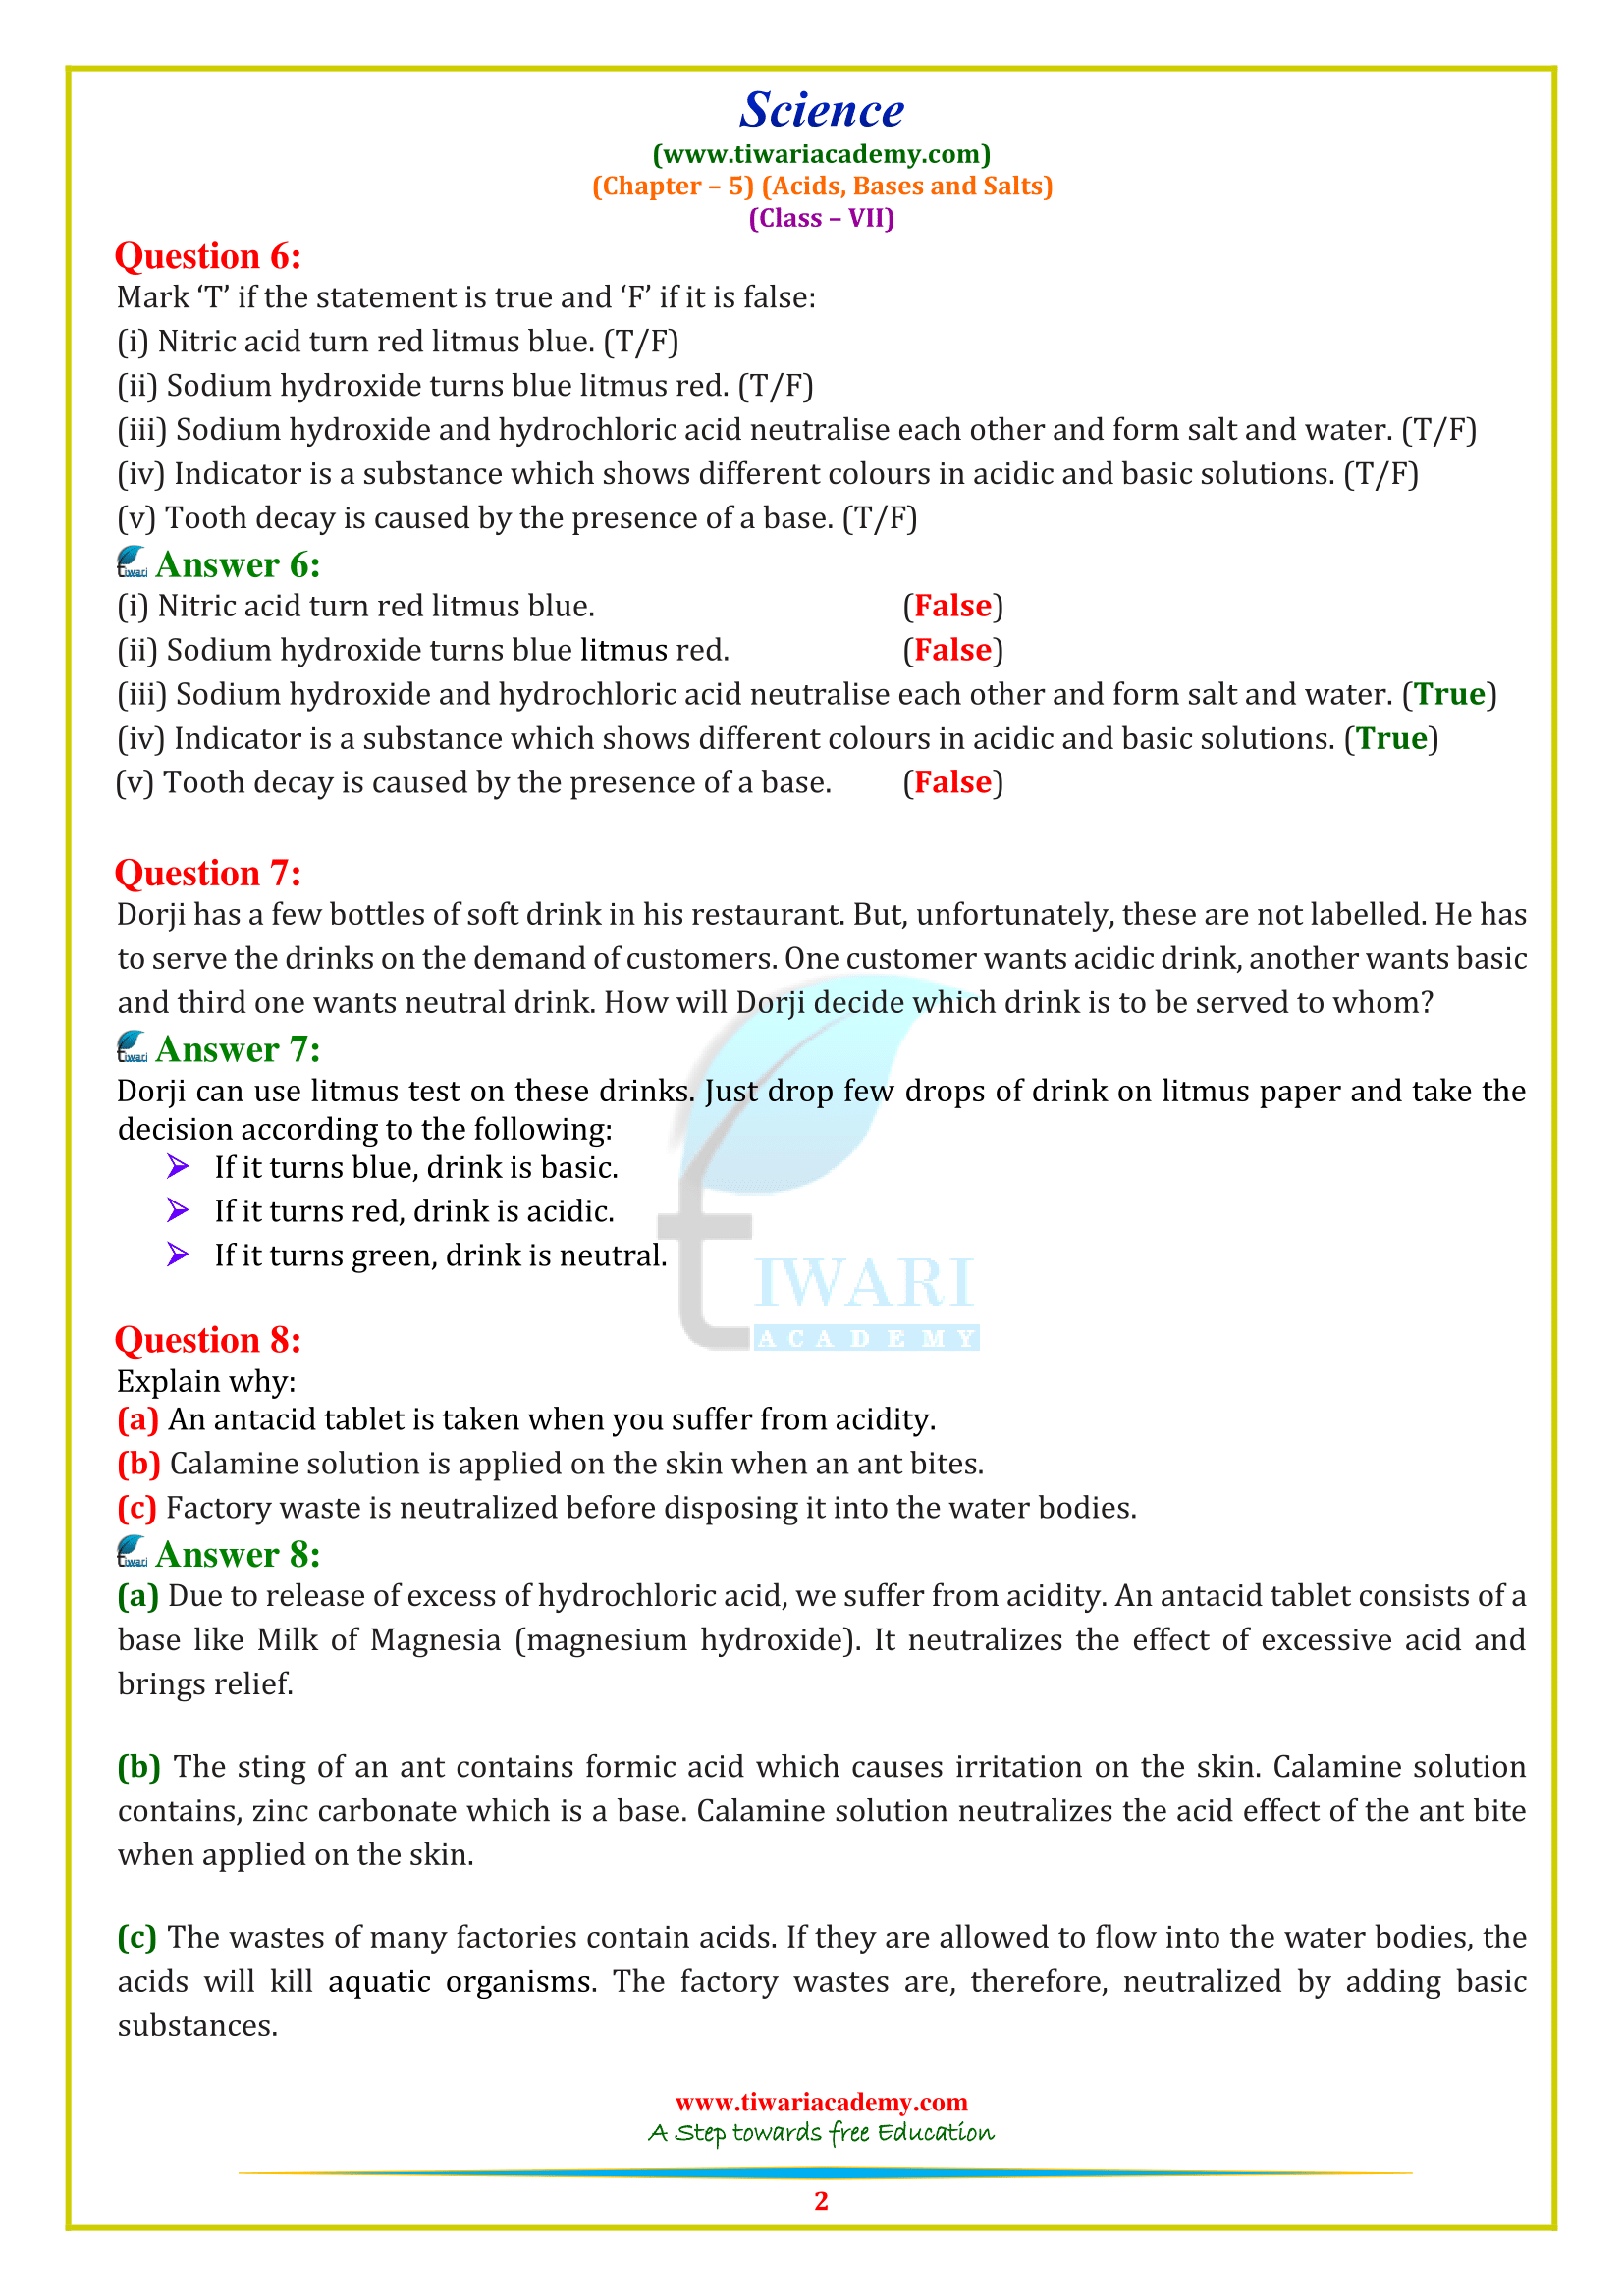 CBSE NCERT Solutions for Class 7 Science Chapter 5 in PDF form